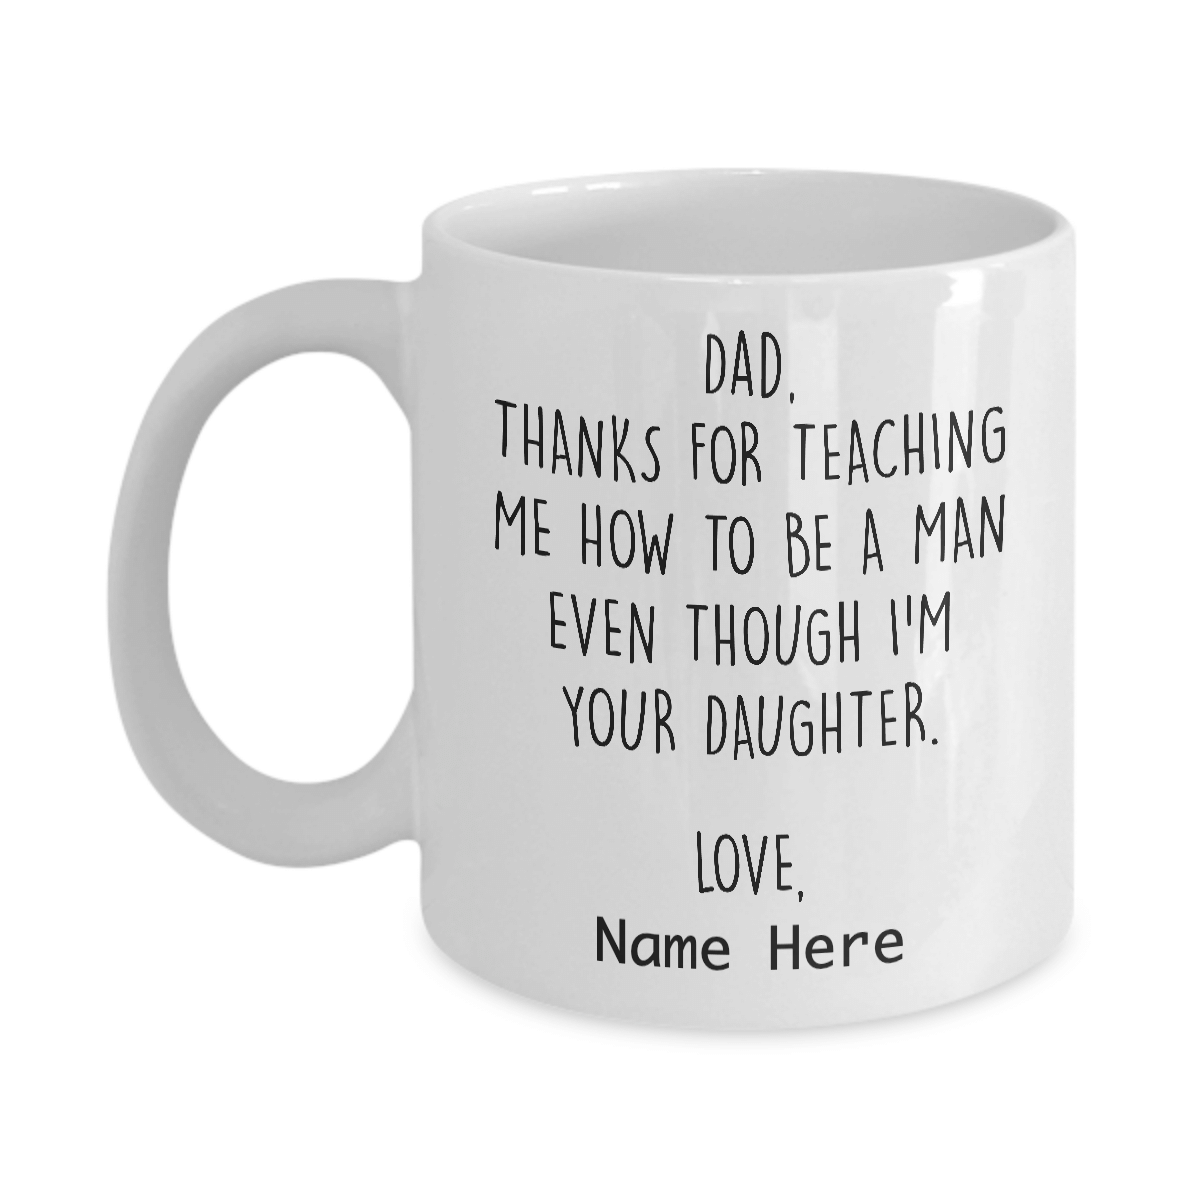 Print In US Dad Thank You For Teaching Me How To Be A Man Even Though Im Your Daughter Funny Daughter and Father Mug Fathers Day Coffee Mug Ceramic 11/15oz 11 oz